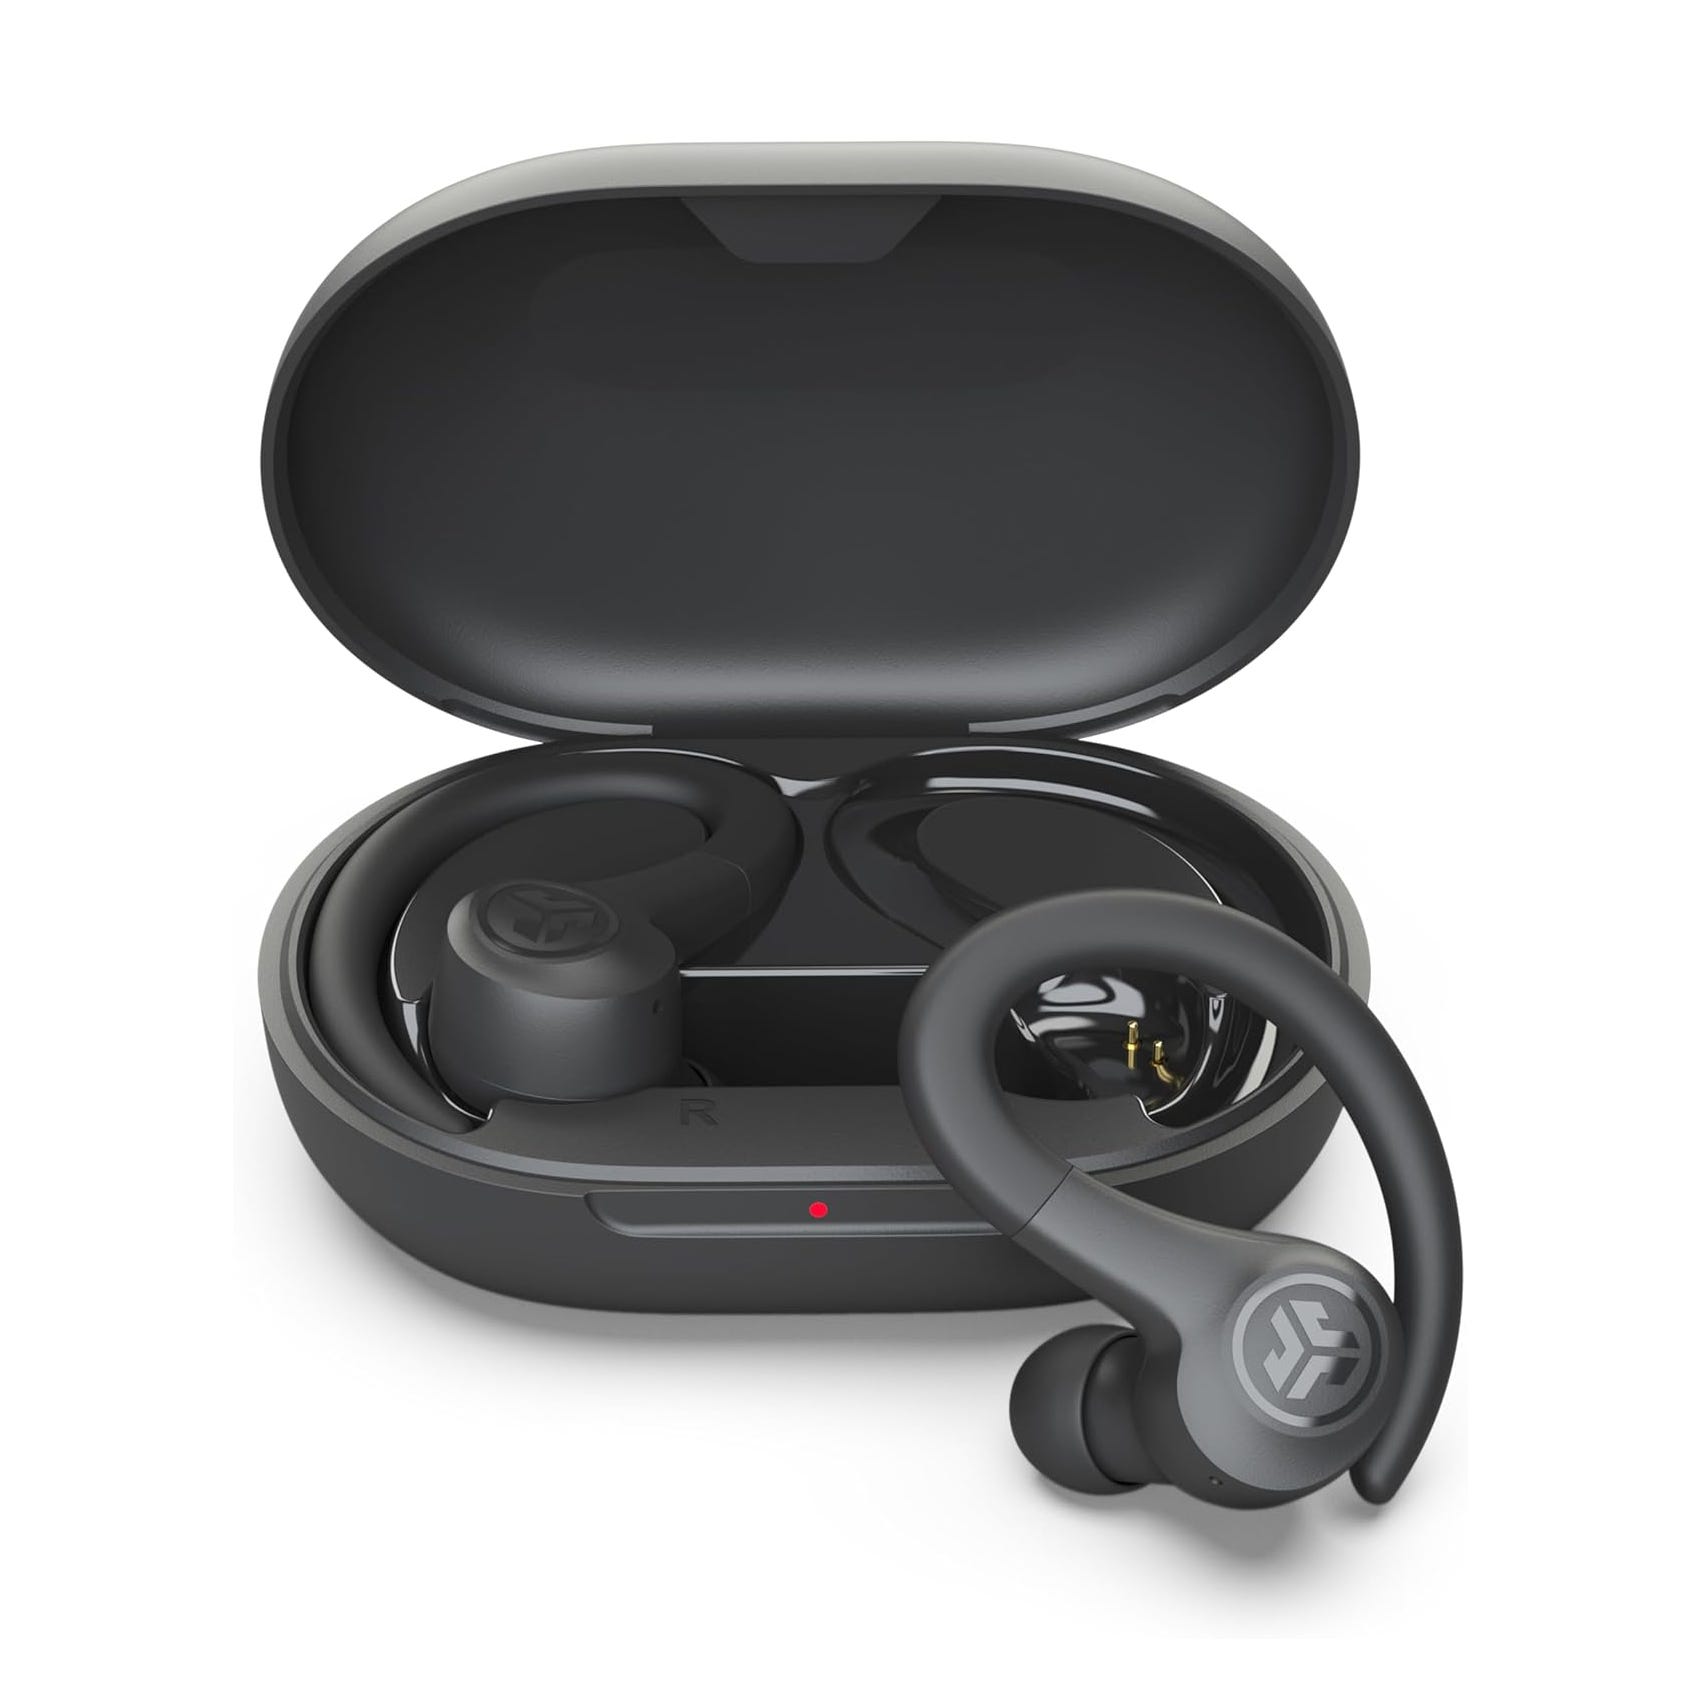 Wireless earbuds with a hook design sitting inside their charging case.